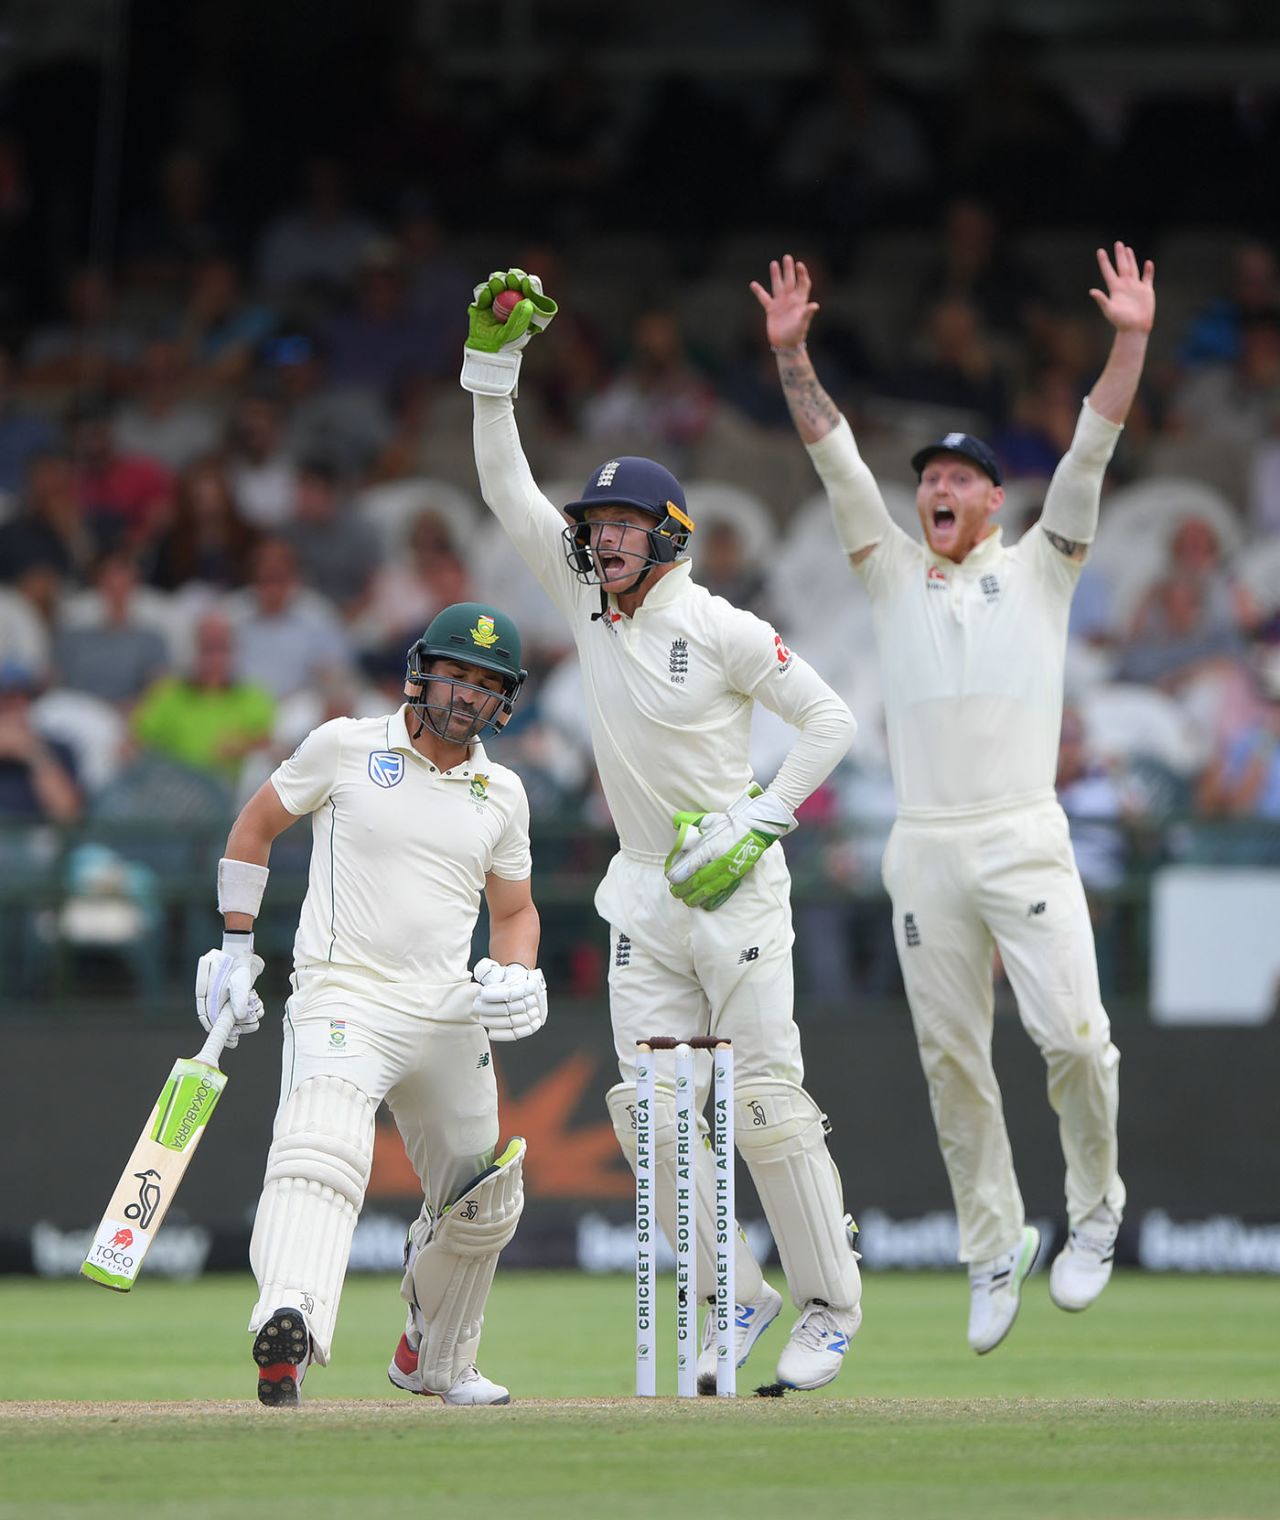 Jos Buttler takes the catch for the wicket of Dean Elgar, South Africa v England, 2nd Test, Cape Town, 4th day, January 6, 2020